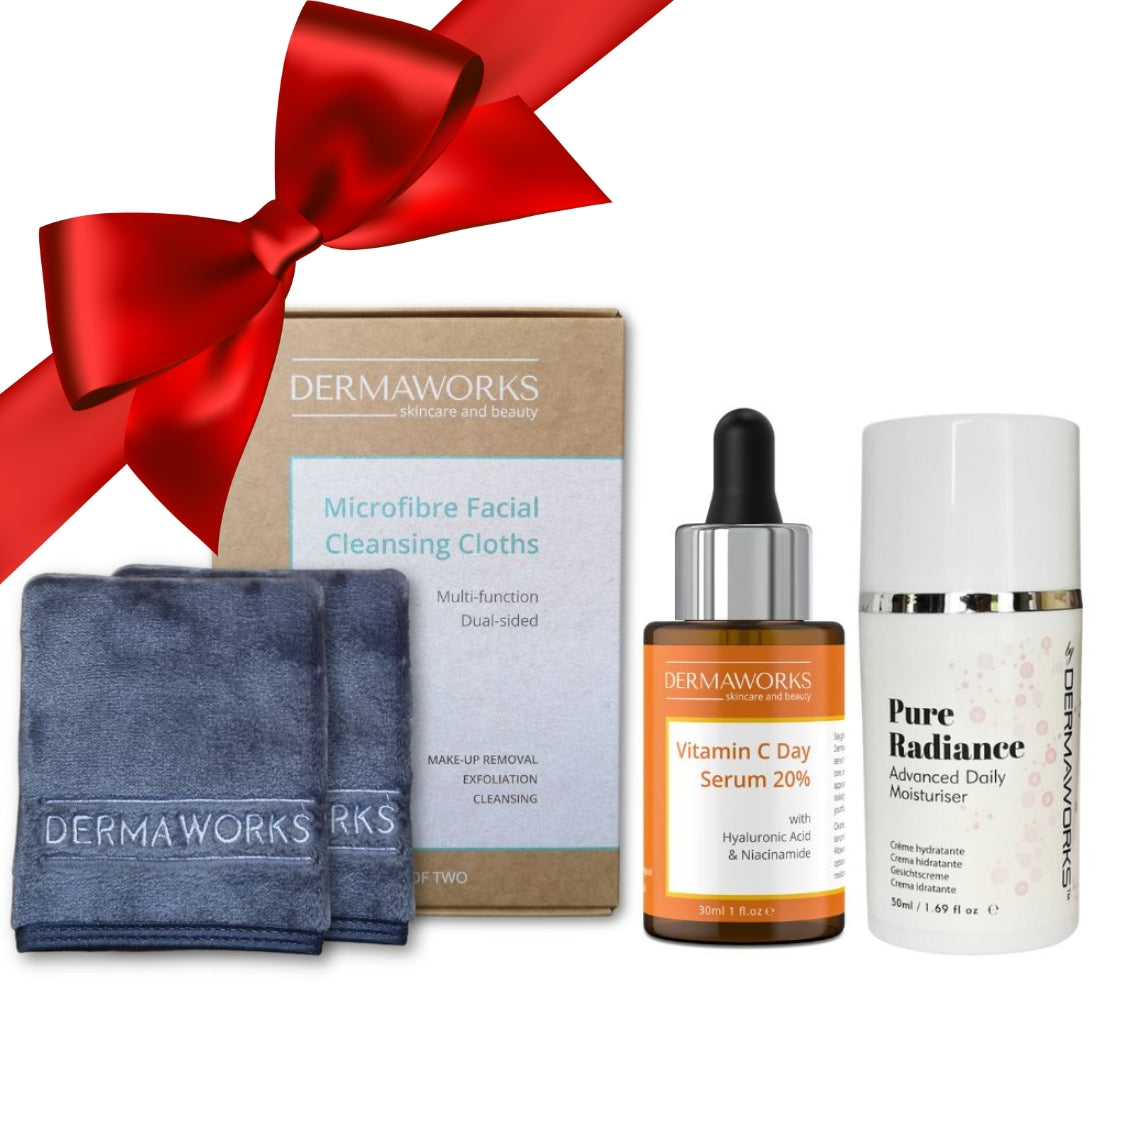 Dermaworks skincare brightening bundle for women; make up removal flannel face cloths, vitamin C serum with Hyaluronic acid and niacinamide, and Pure Radiance moisturising face cream.